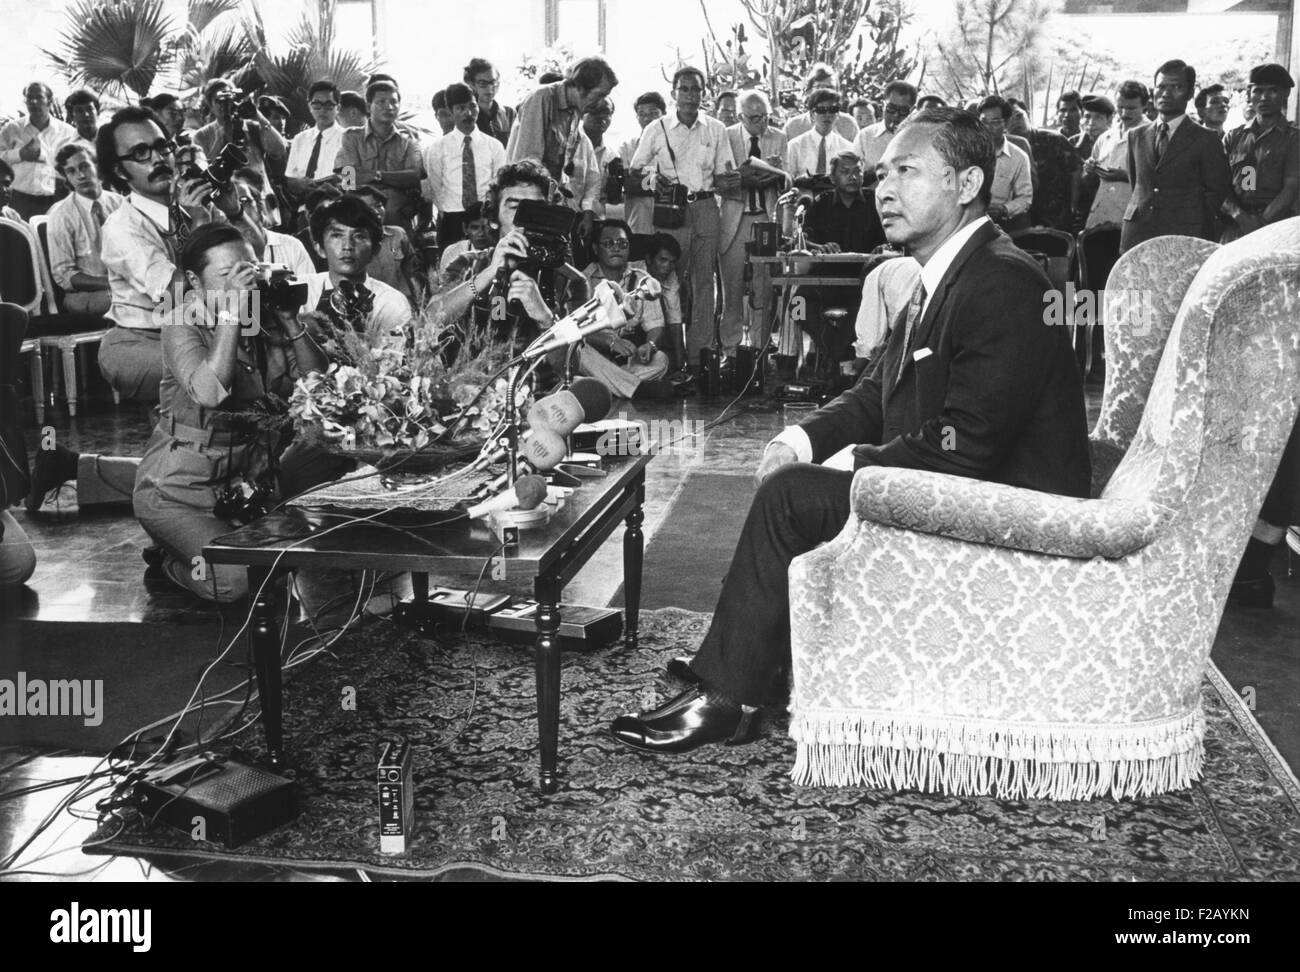 President Lon Nol at a press conference at the Presidential Palace on Aug. 29, 1973. After he was deposed by Lon Nol, Prince Sihanouk allied himself with the Khmer Rouge, who controlled the majority of Cambodian territory in 1973. (CSU 2015 9 765) Stock Photo